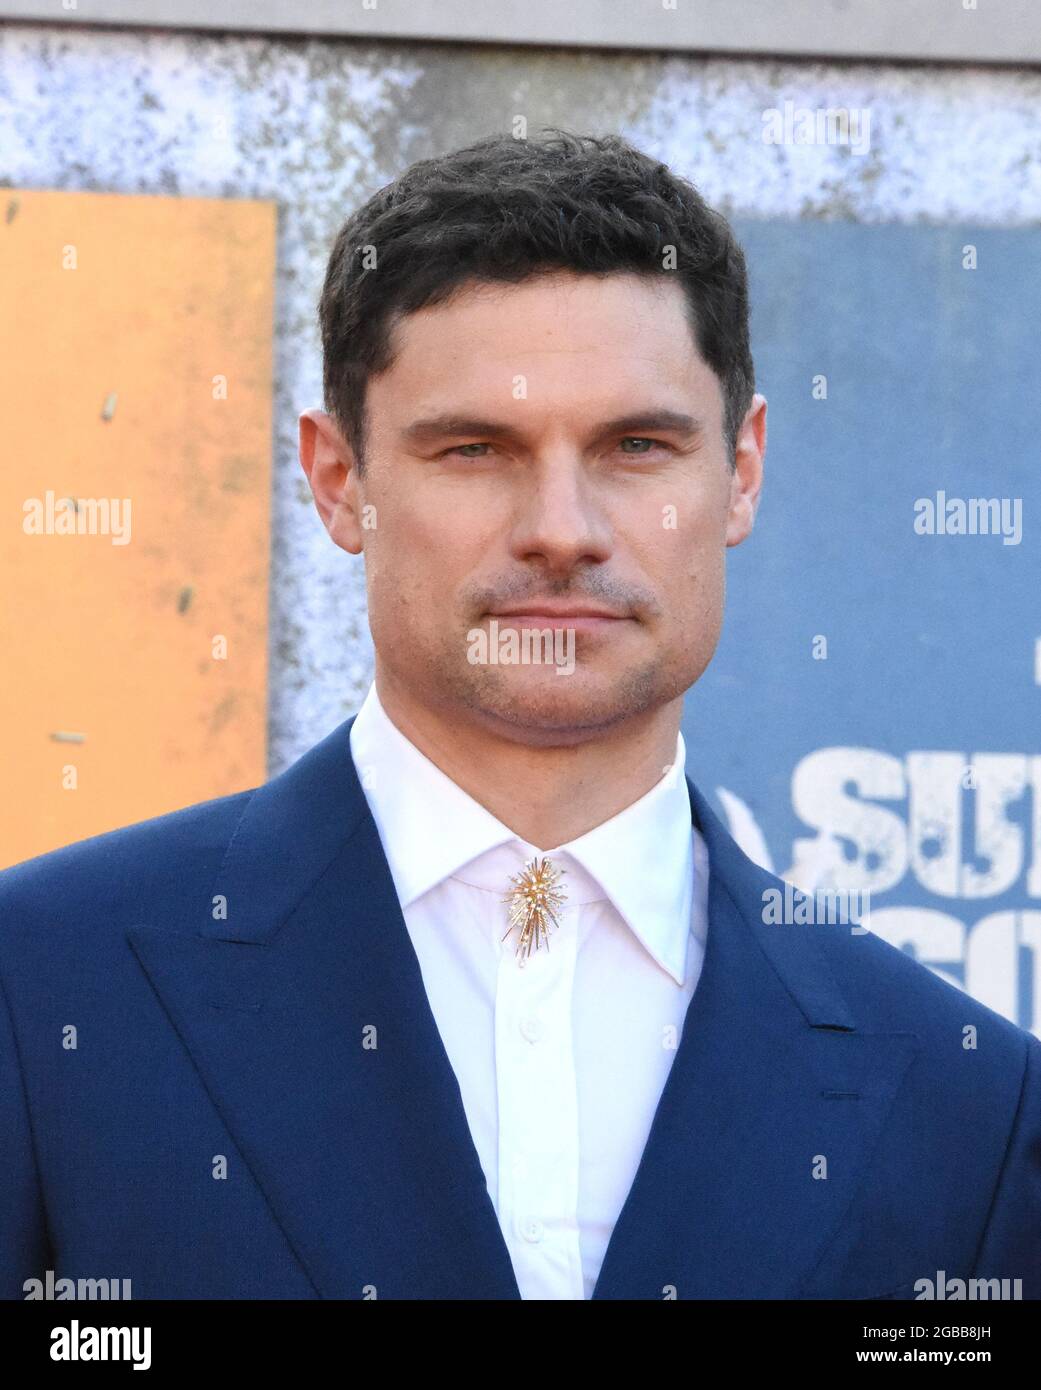 Los Angeles, California, USA 2nd August 2021 Actor Flula Borg attends Warner Bros. Premiere of 'The Suicide Squad' at Regency Village Theatre on August 2, 2021 in Los Angeles, California, USA. Photo by Barry King/Alamy Live News Stock Photo